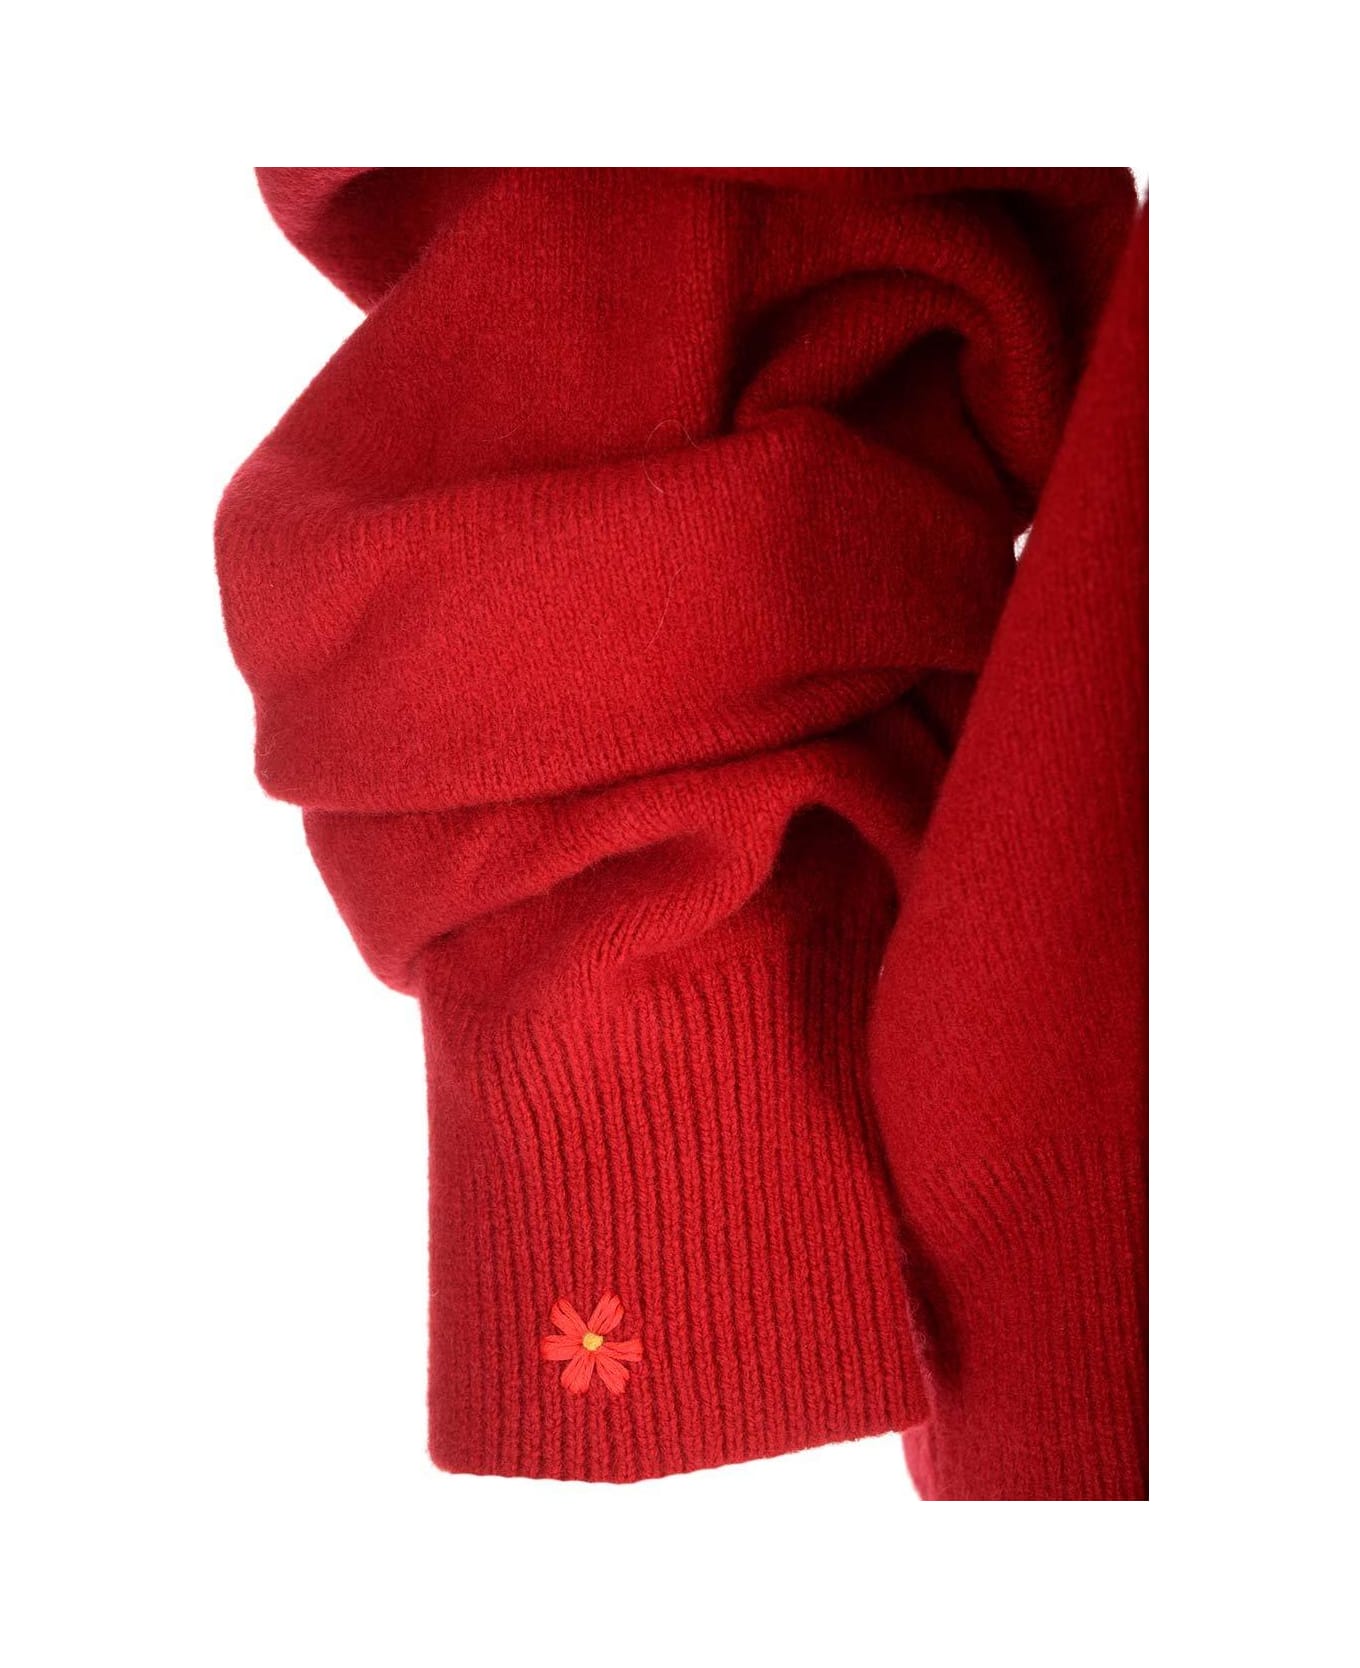 Tory Burch V-neck Long-sleeved Sweater - Red